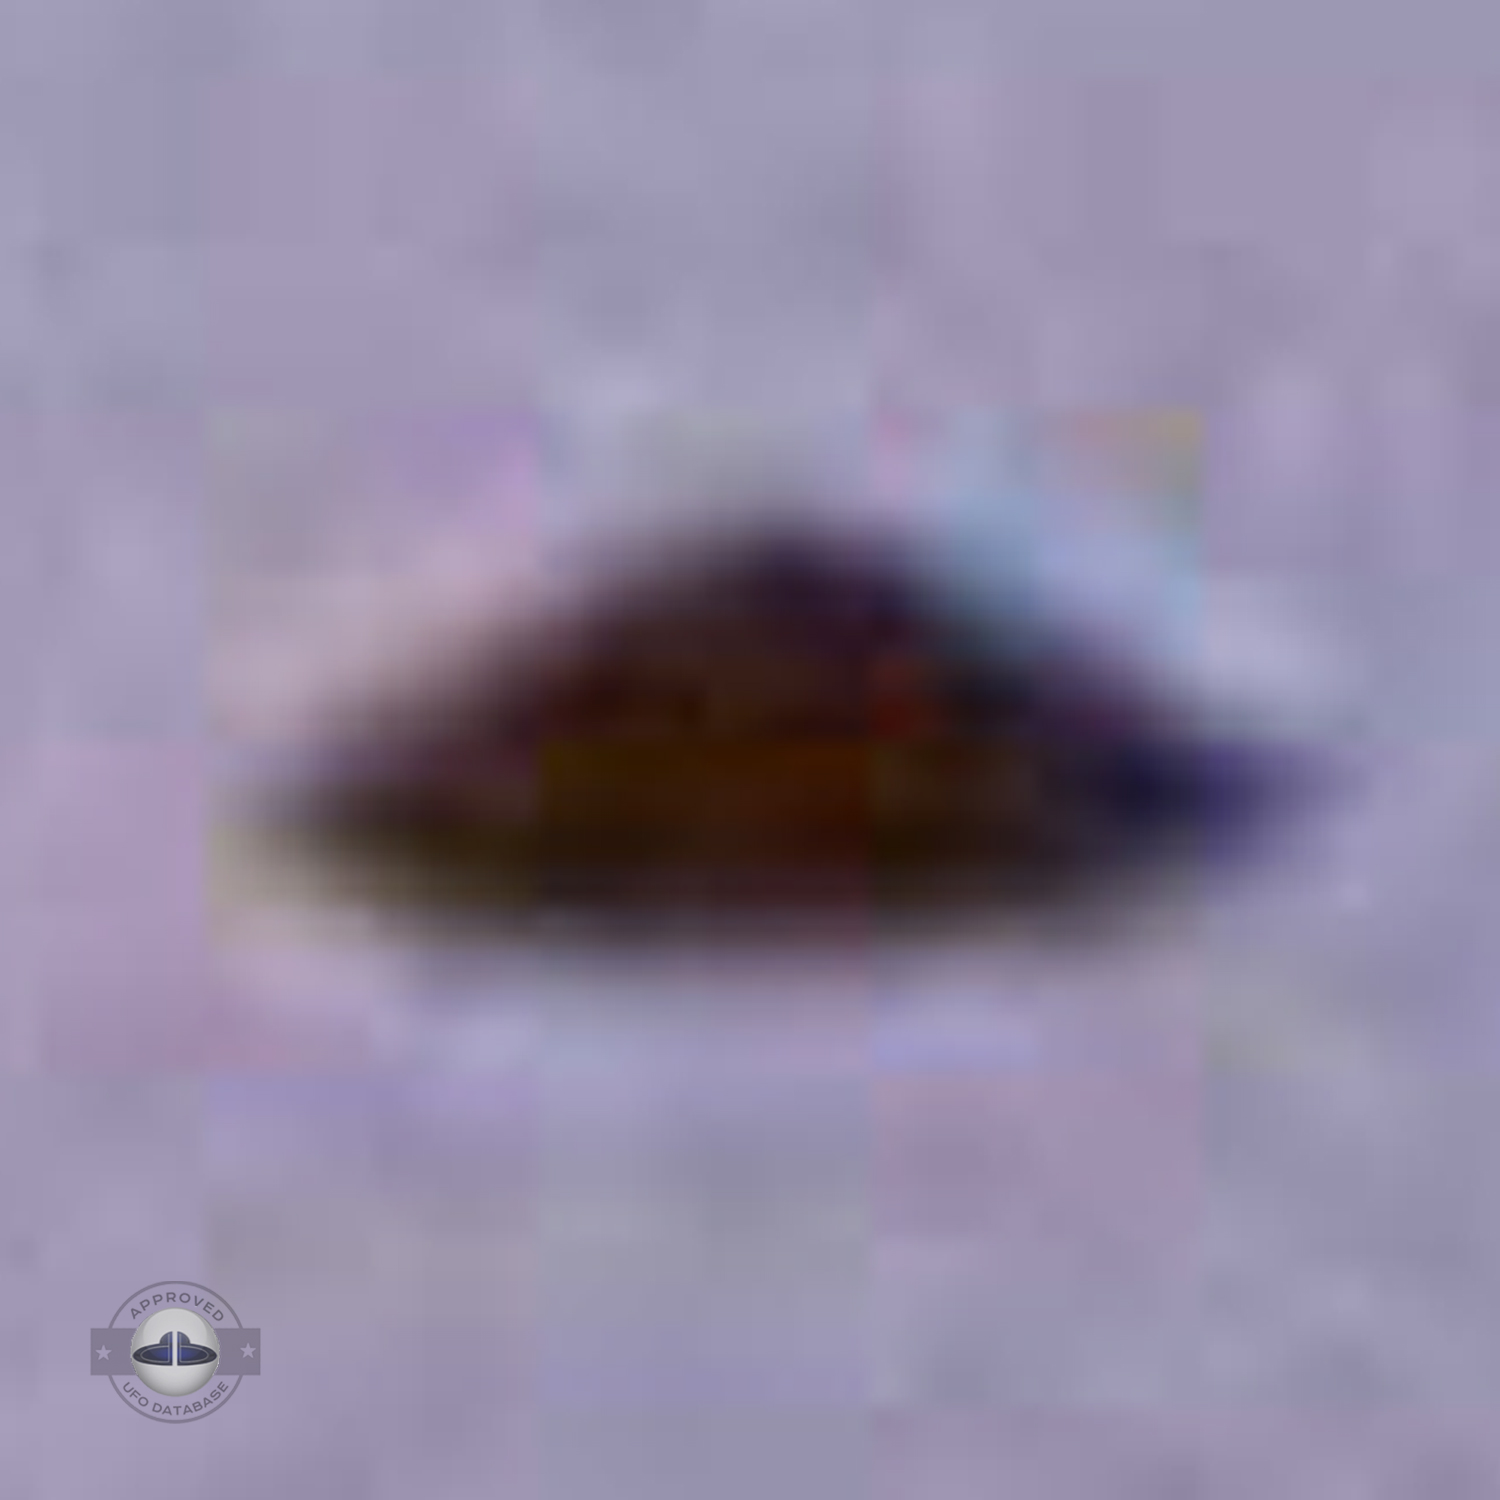 UFO seen over a roof of a house in Puerto Madryn in Argentina 1975 UFO Picture #28-5